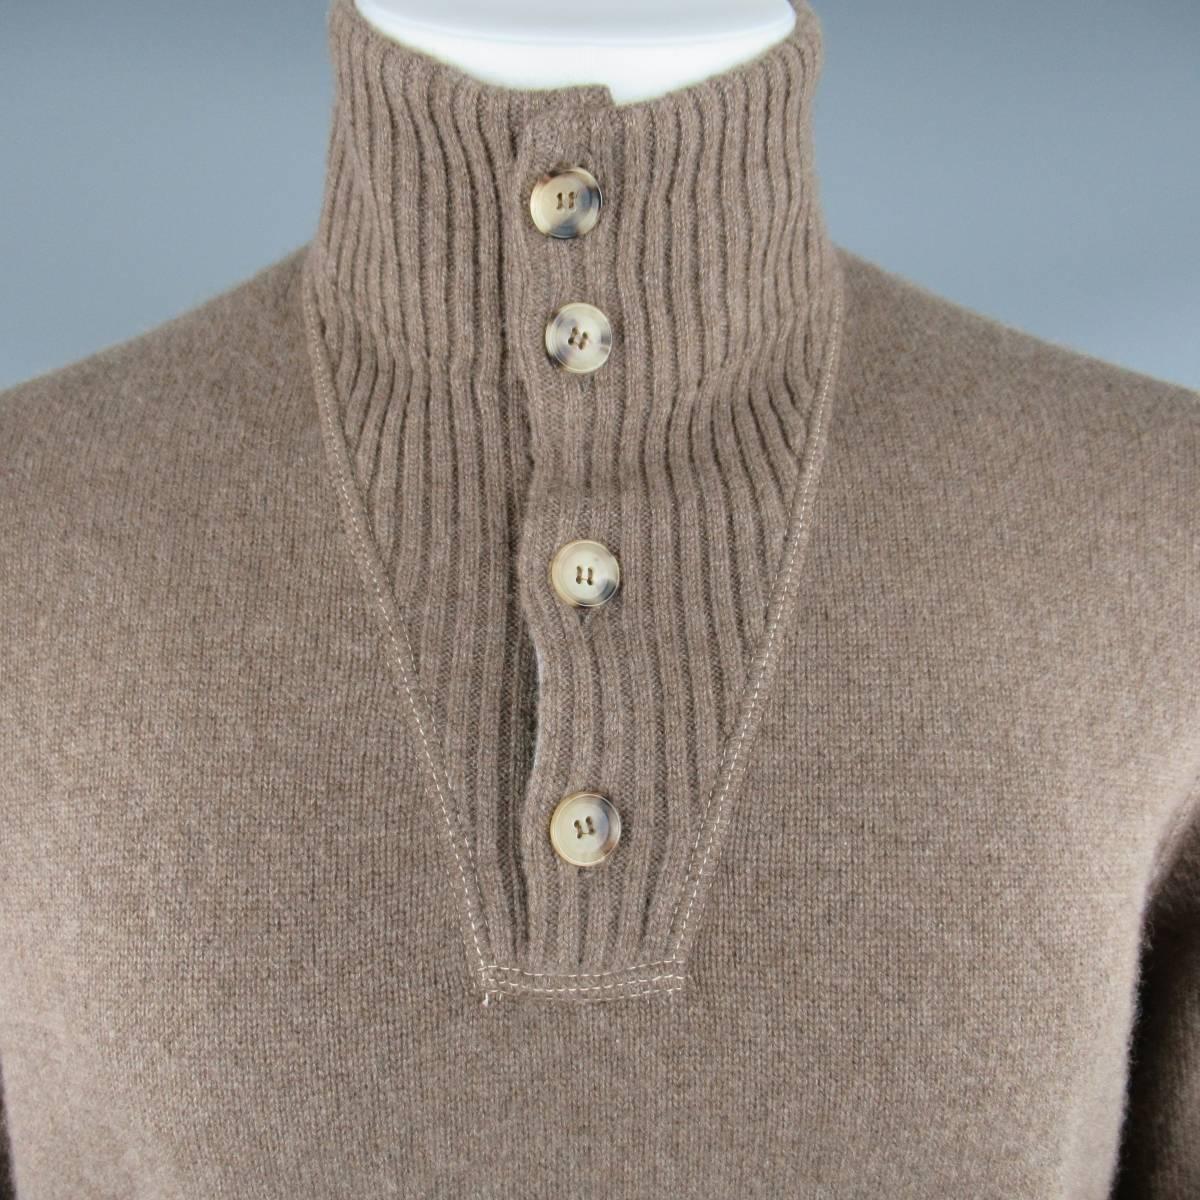 BRUNELLO CUCINELLI Sweater consists of cashmere blend material in a brown color tone. Designed in a high-collar, button-up chest in a rib pattern. Raglan shoulder detail with rib cuff and hem. Contrast white stitching.  Made in Italy.
 
Good